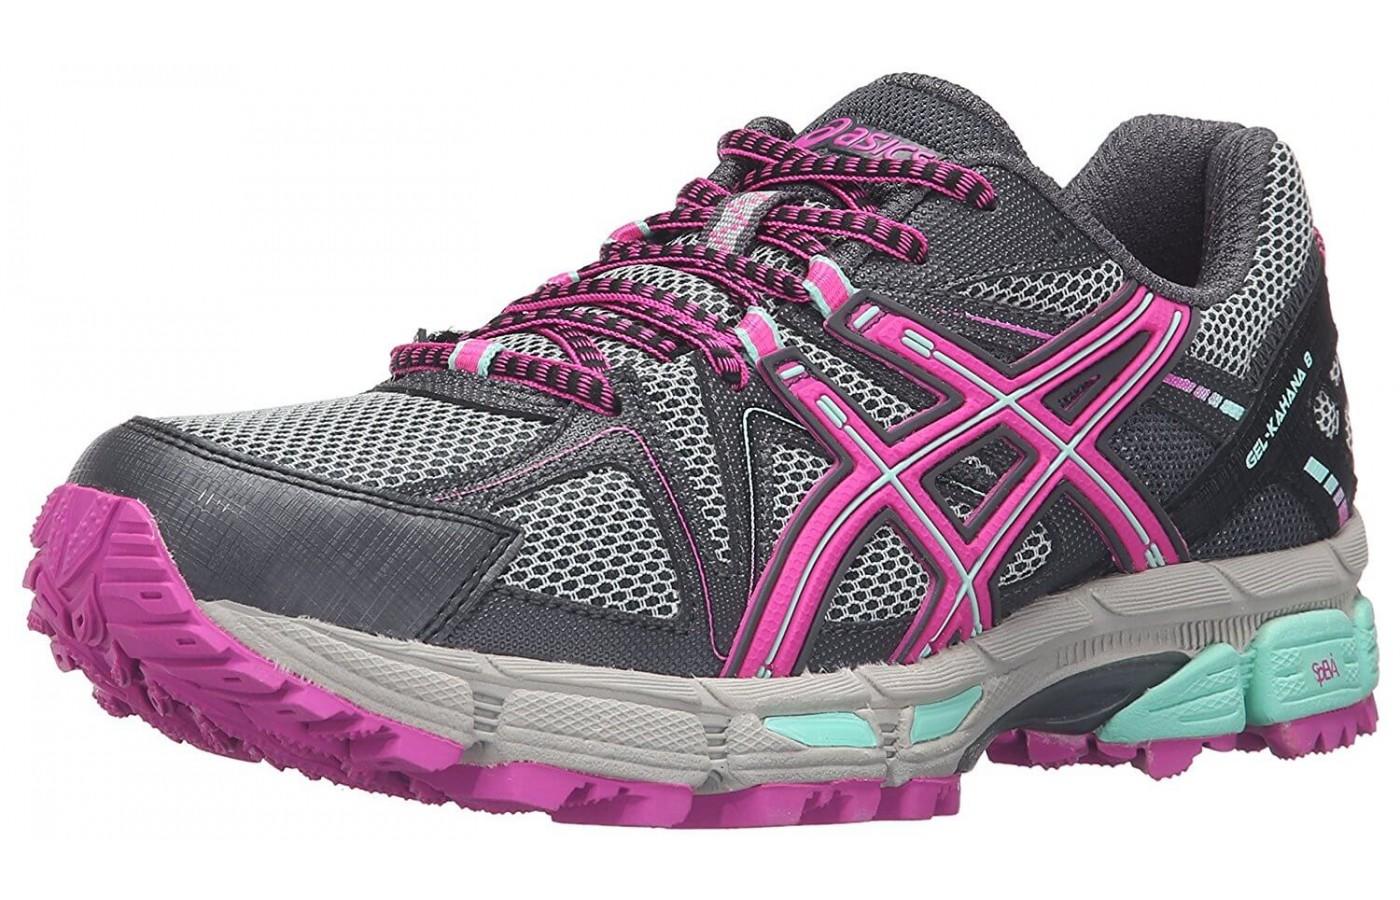 Asics presents the newest member of the Gel Kahana line with its 8th incarnation. 